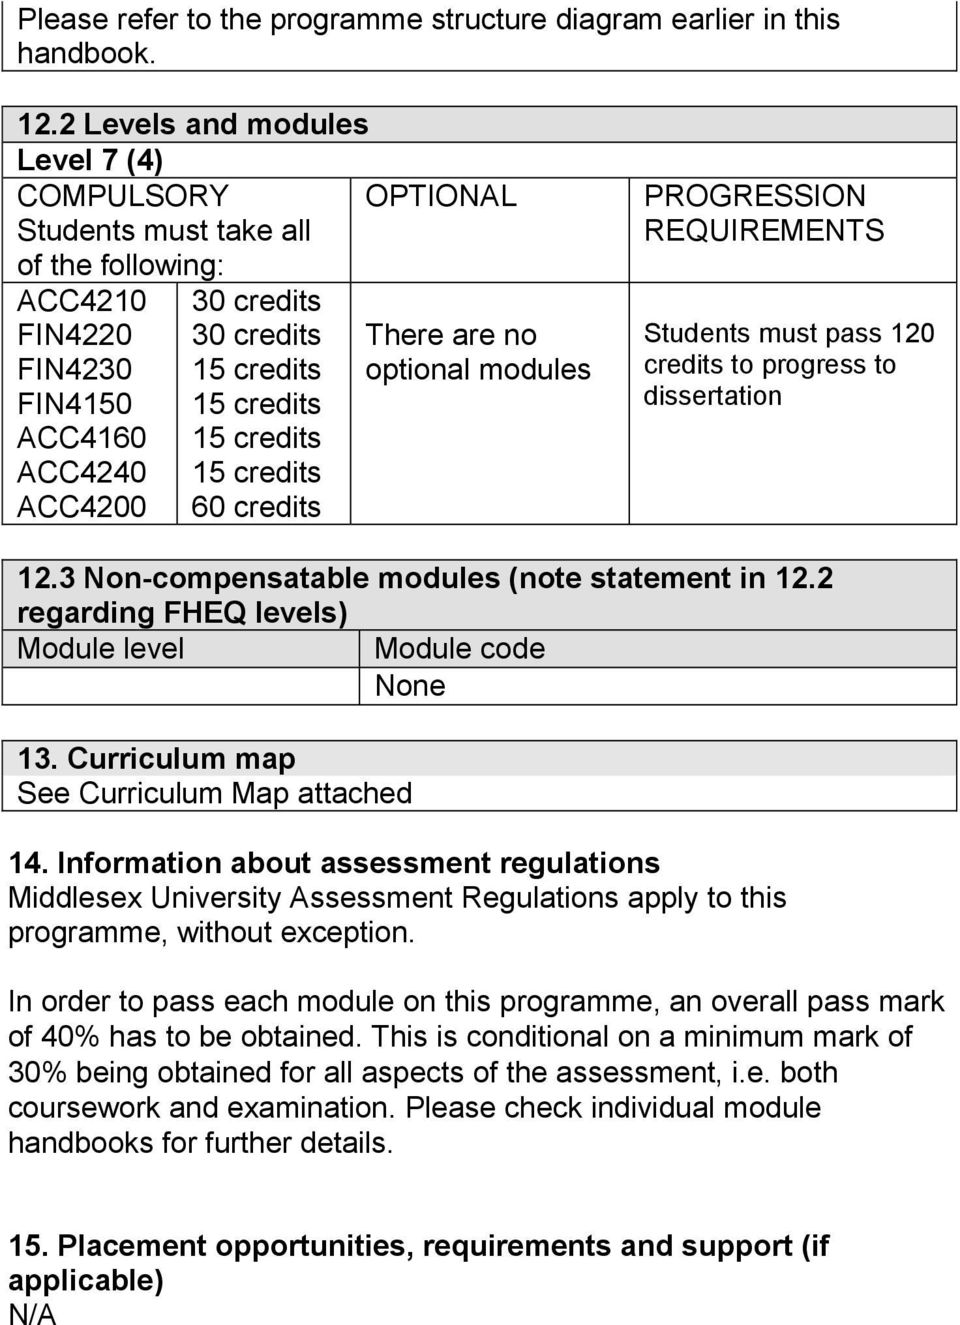 credits CC440 15 credits CC400 60 credits PRORESSION REQUIREMENS Students must pass 10 credits to progress to dissertation 1.3 Non-compensatable modules (note statement in 1.